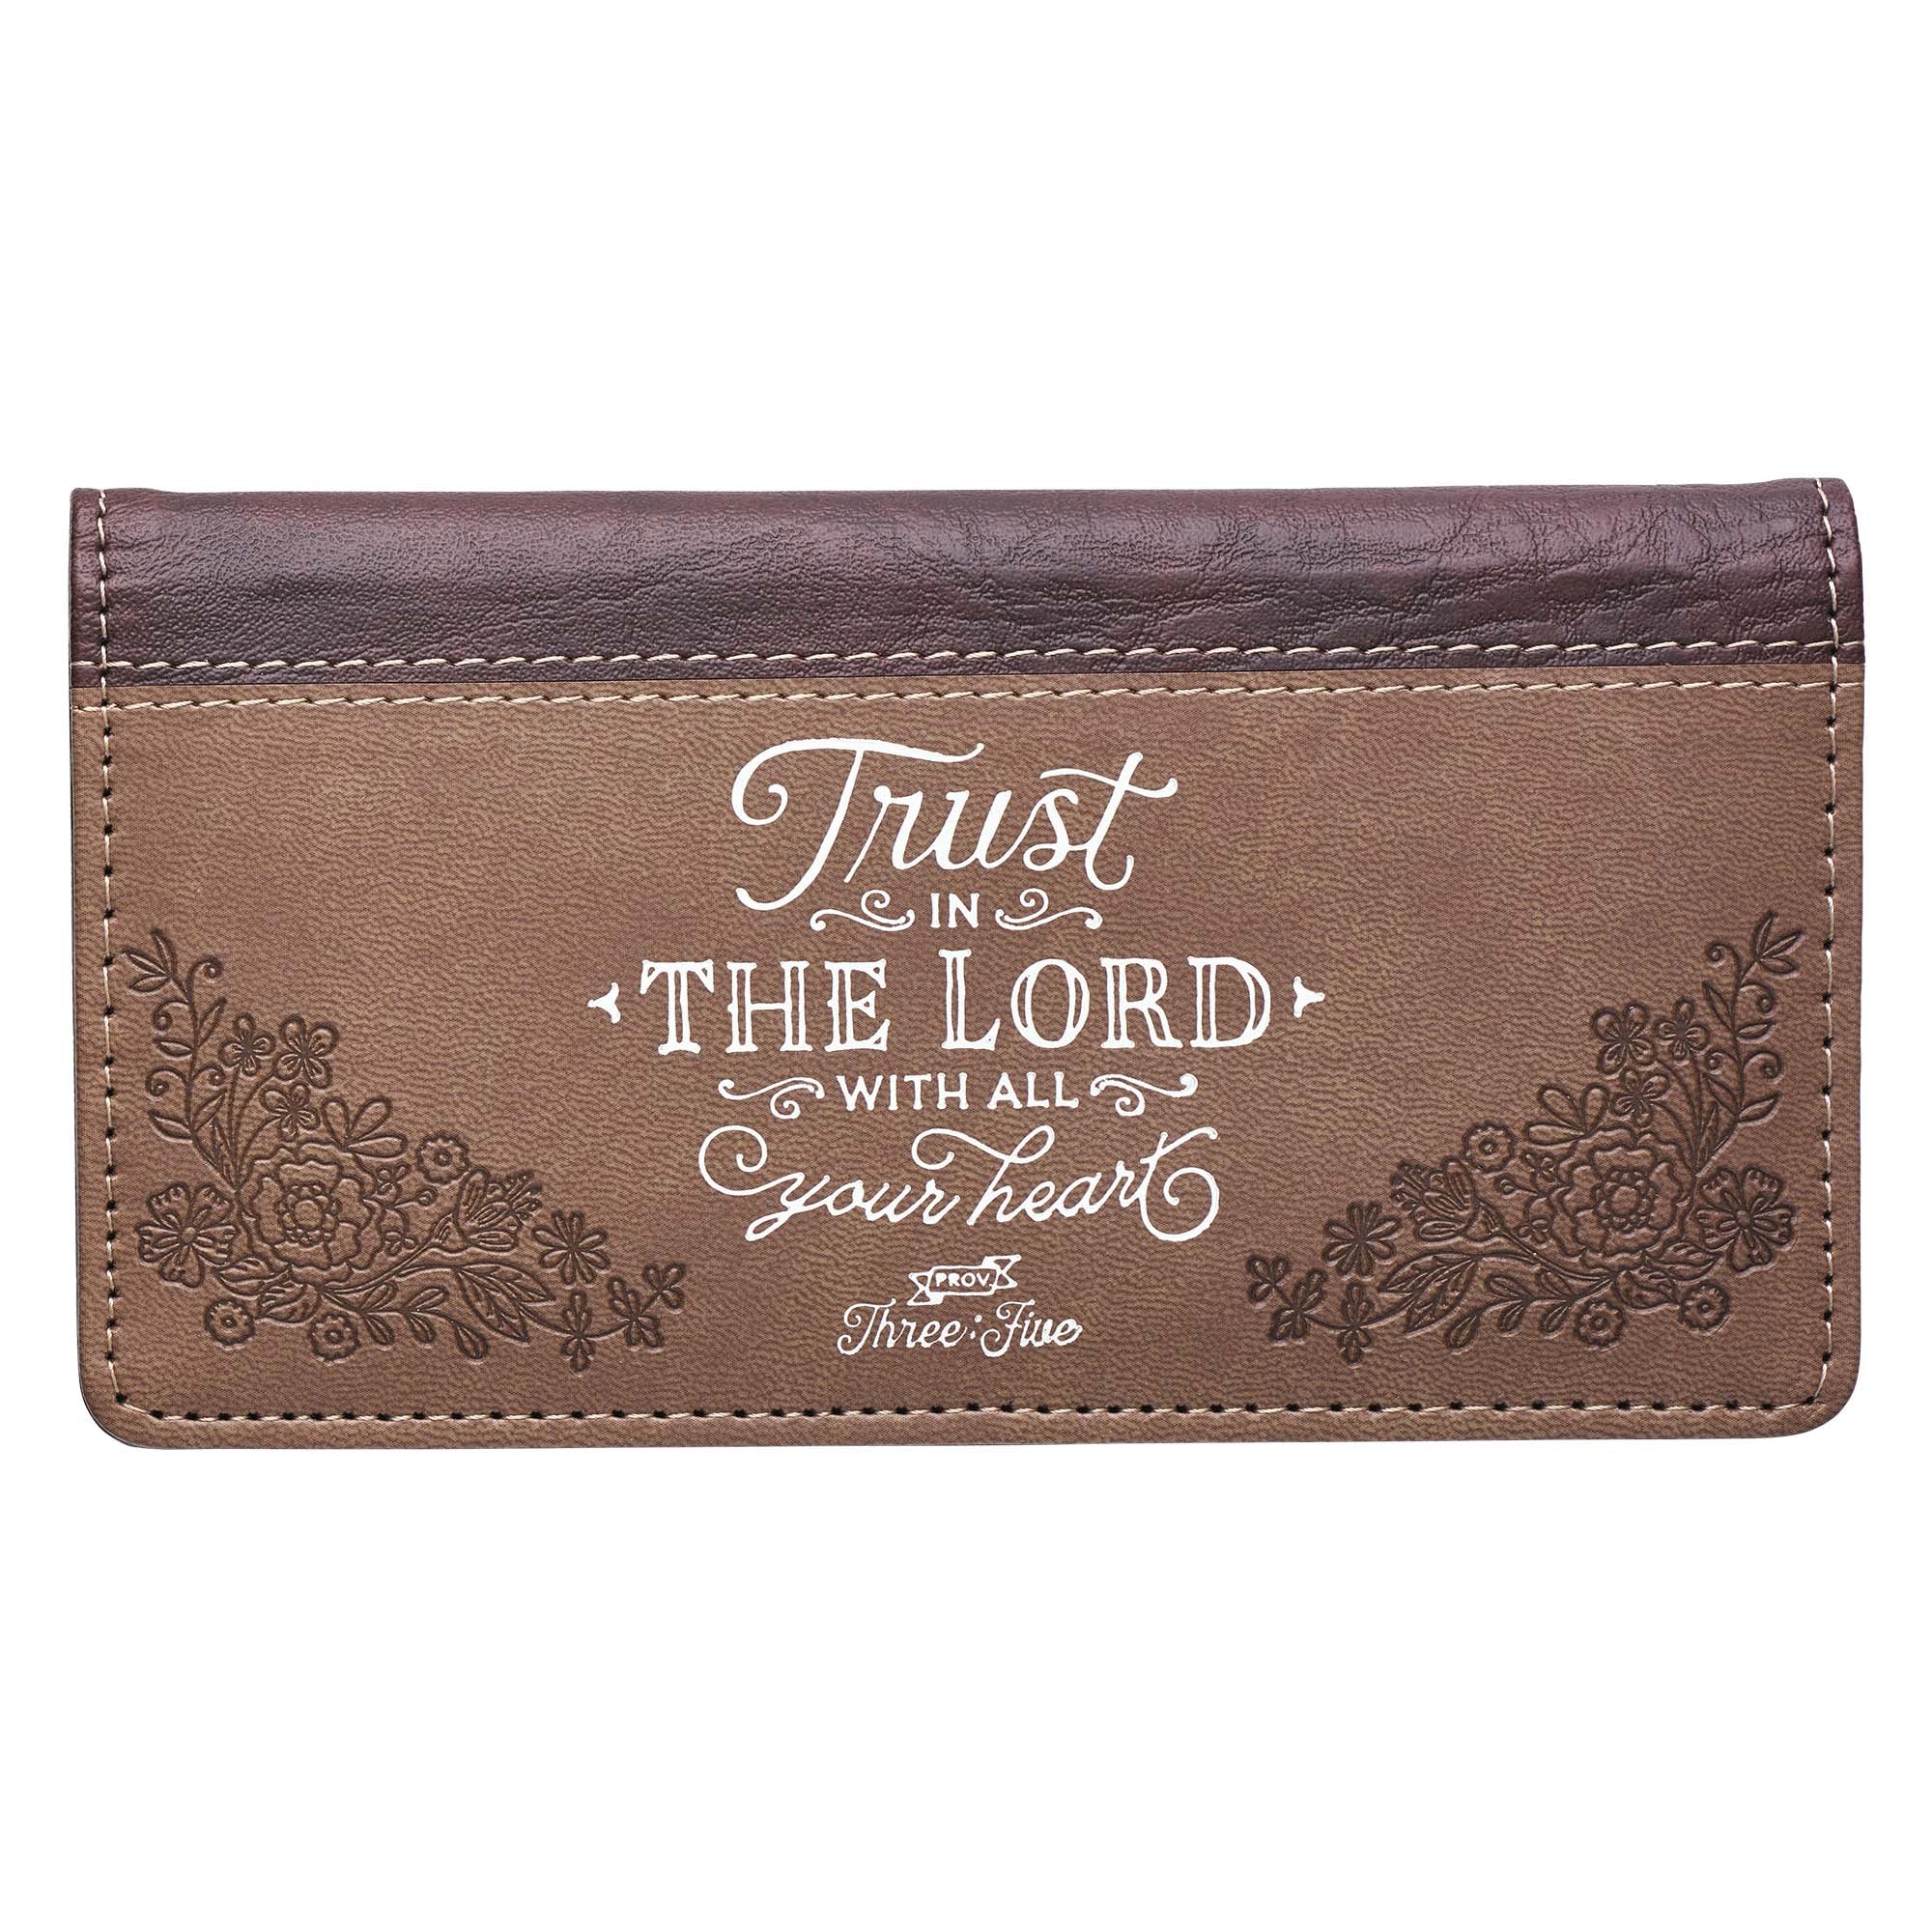 Trust in the Lord Bible Cover, Black/Blue, XL